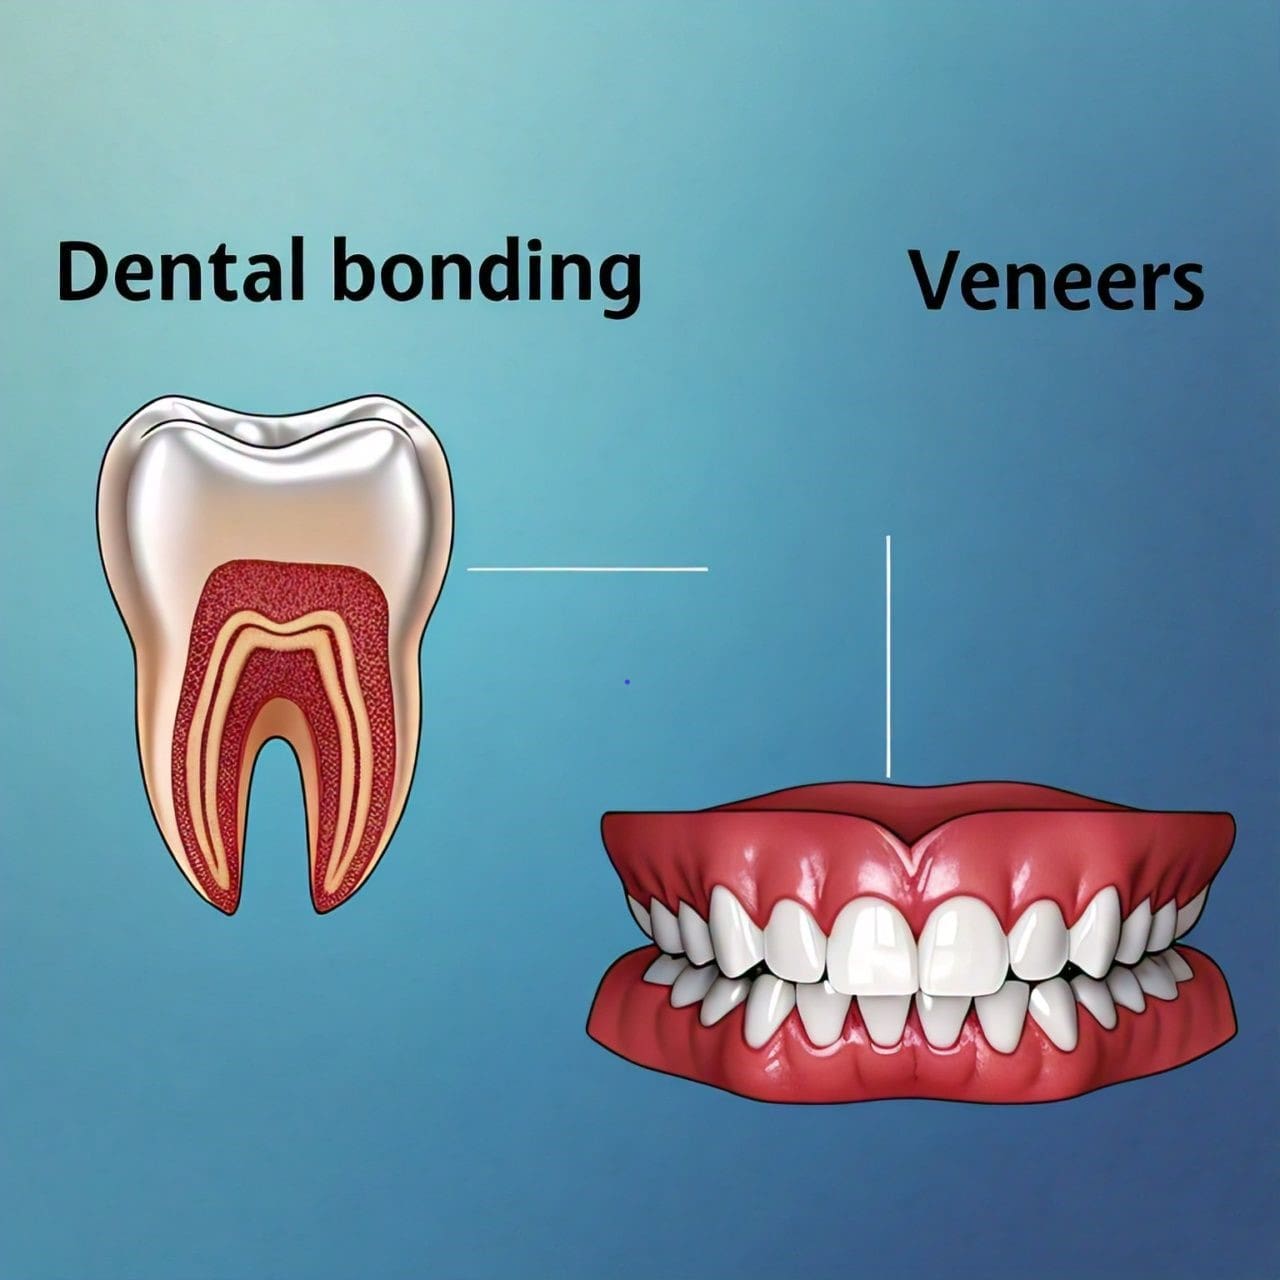 Comparison of Dental Bonding and Veneers: Understanding the Key Differences